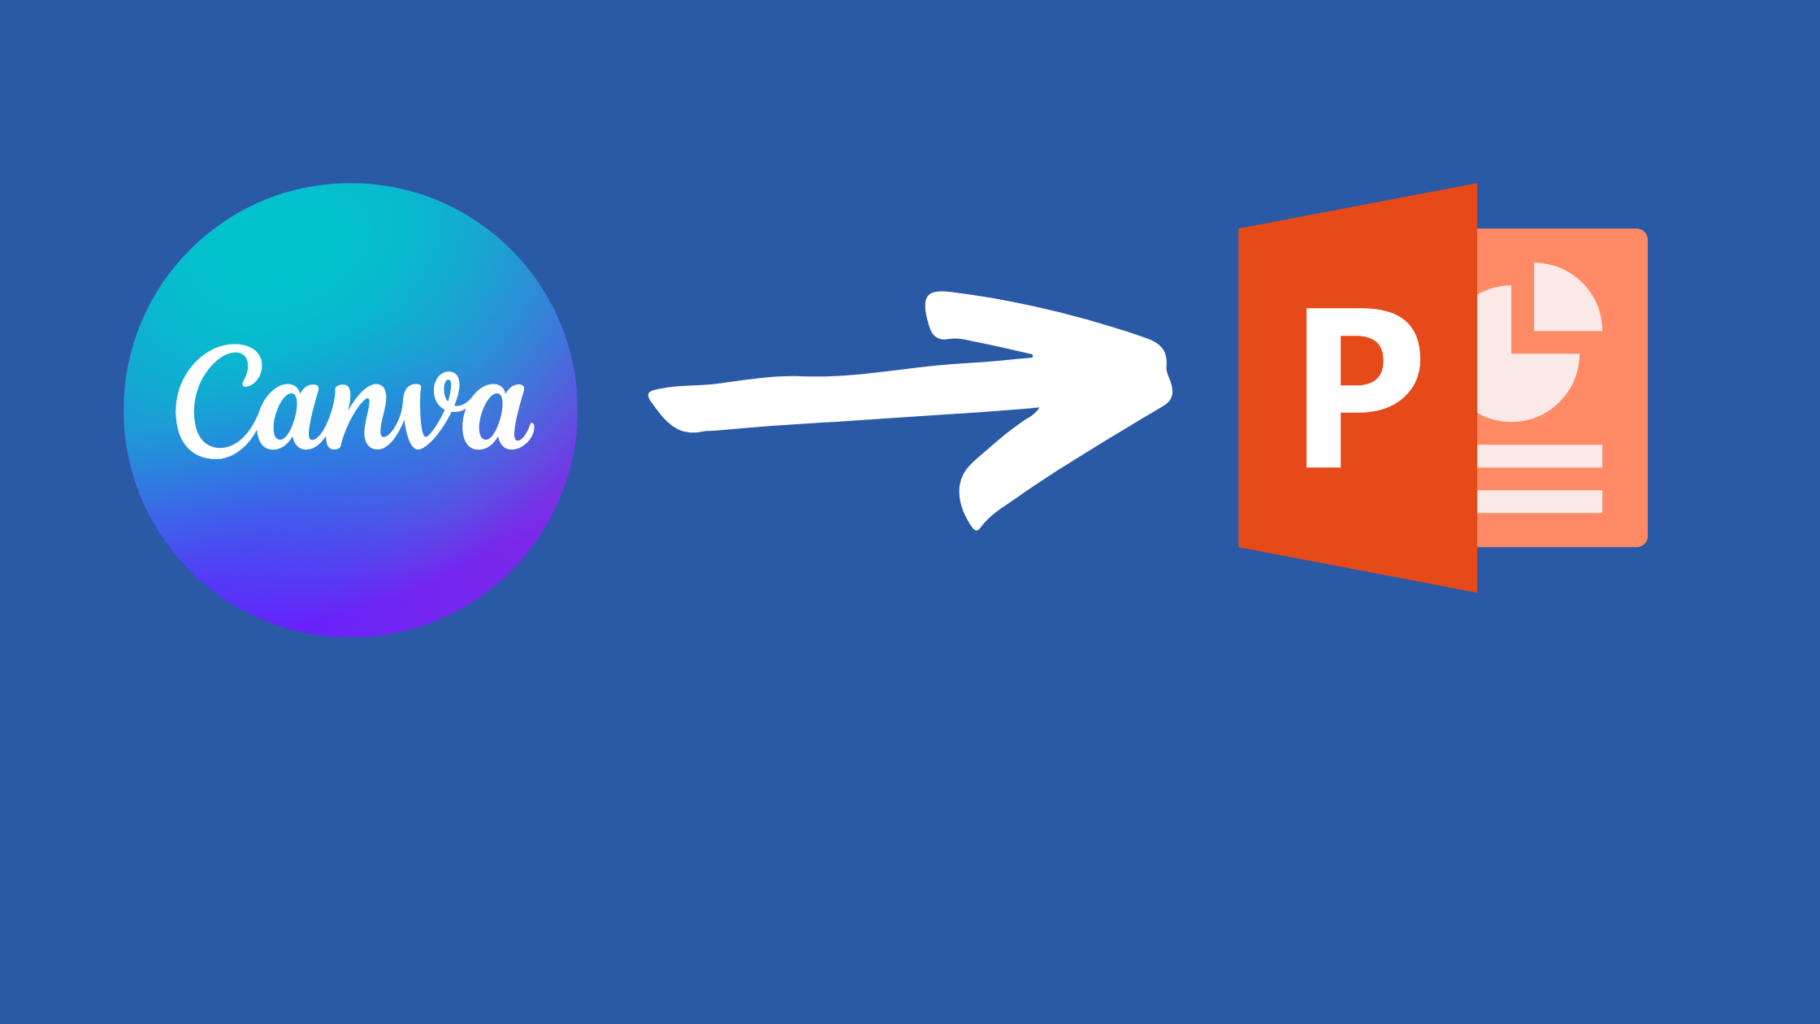 image of Canva icon and arrow pointing to a PowerPoint icon